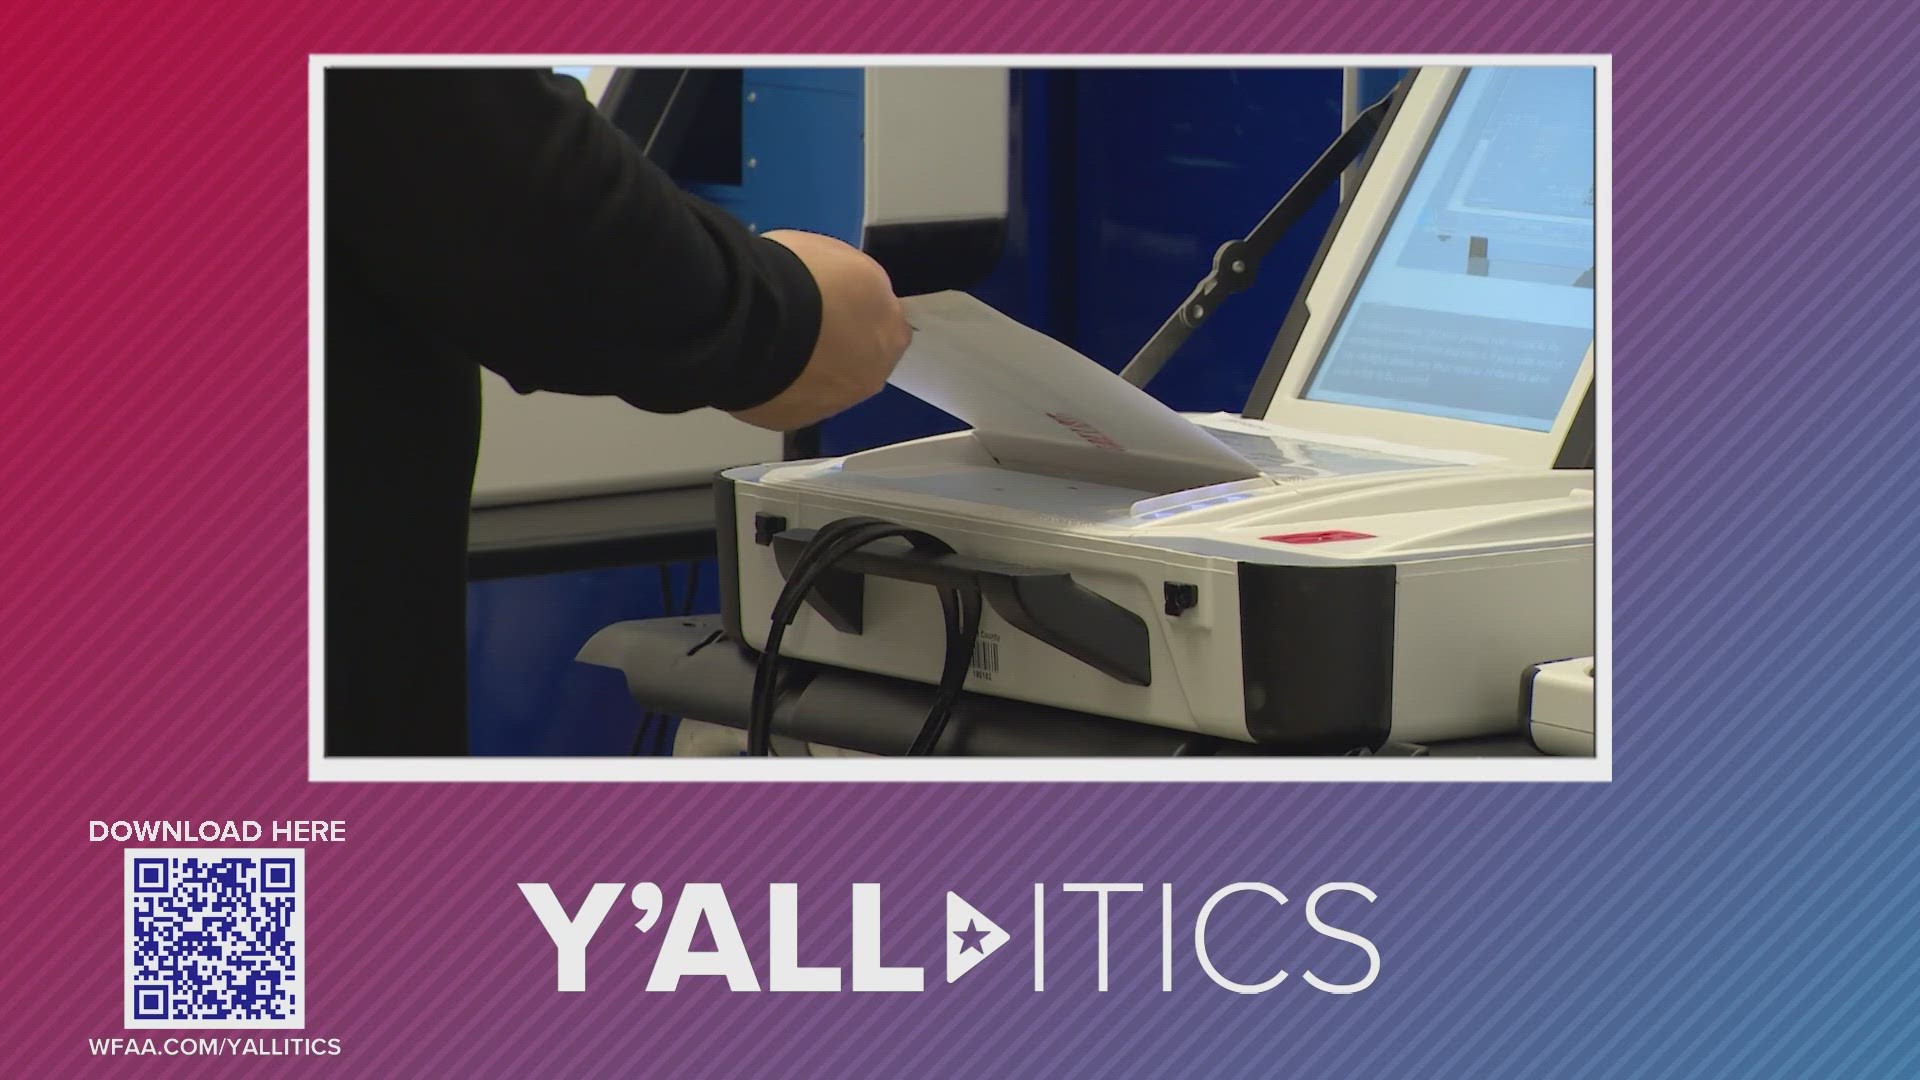 Texas voters are deciding on 14 different potential constitutional amendments this year.